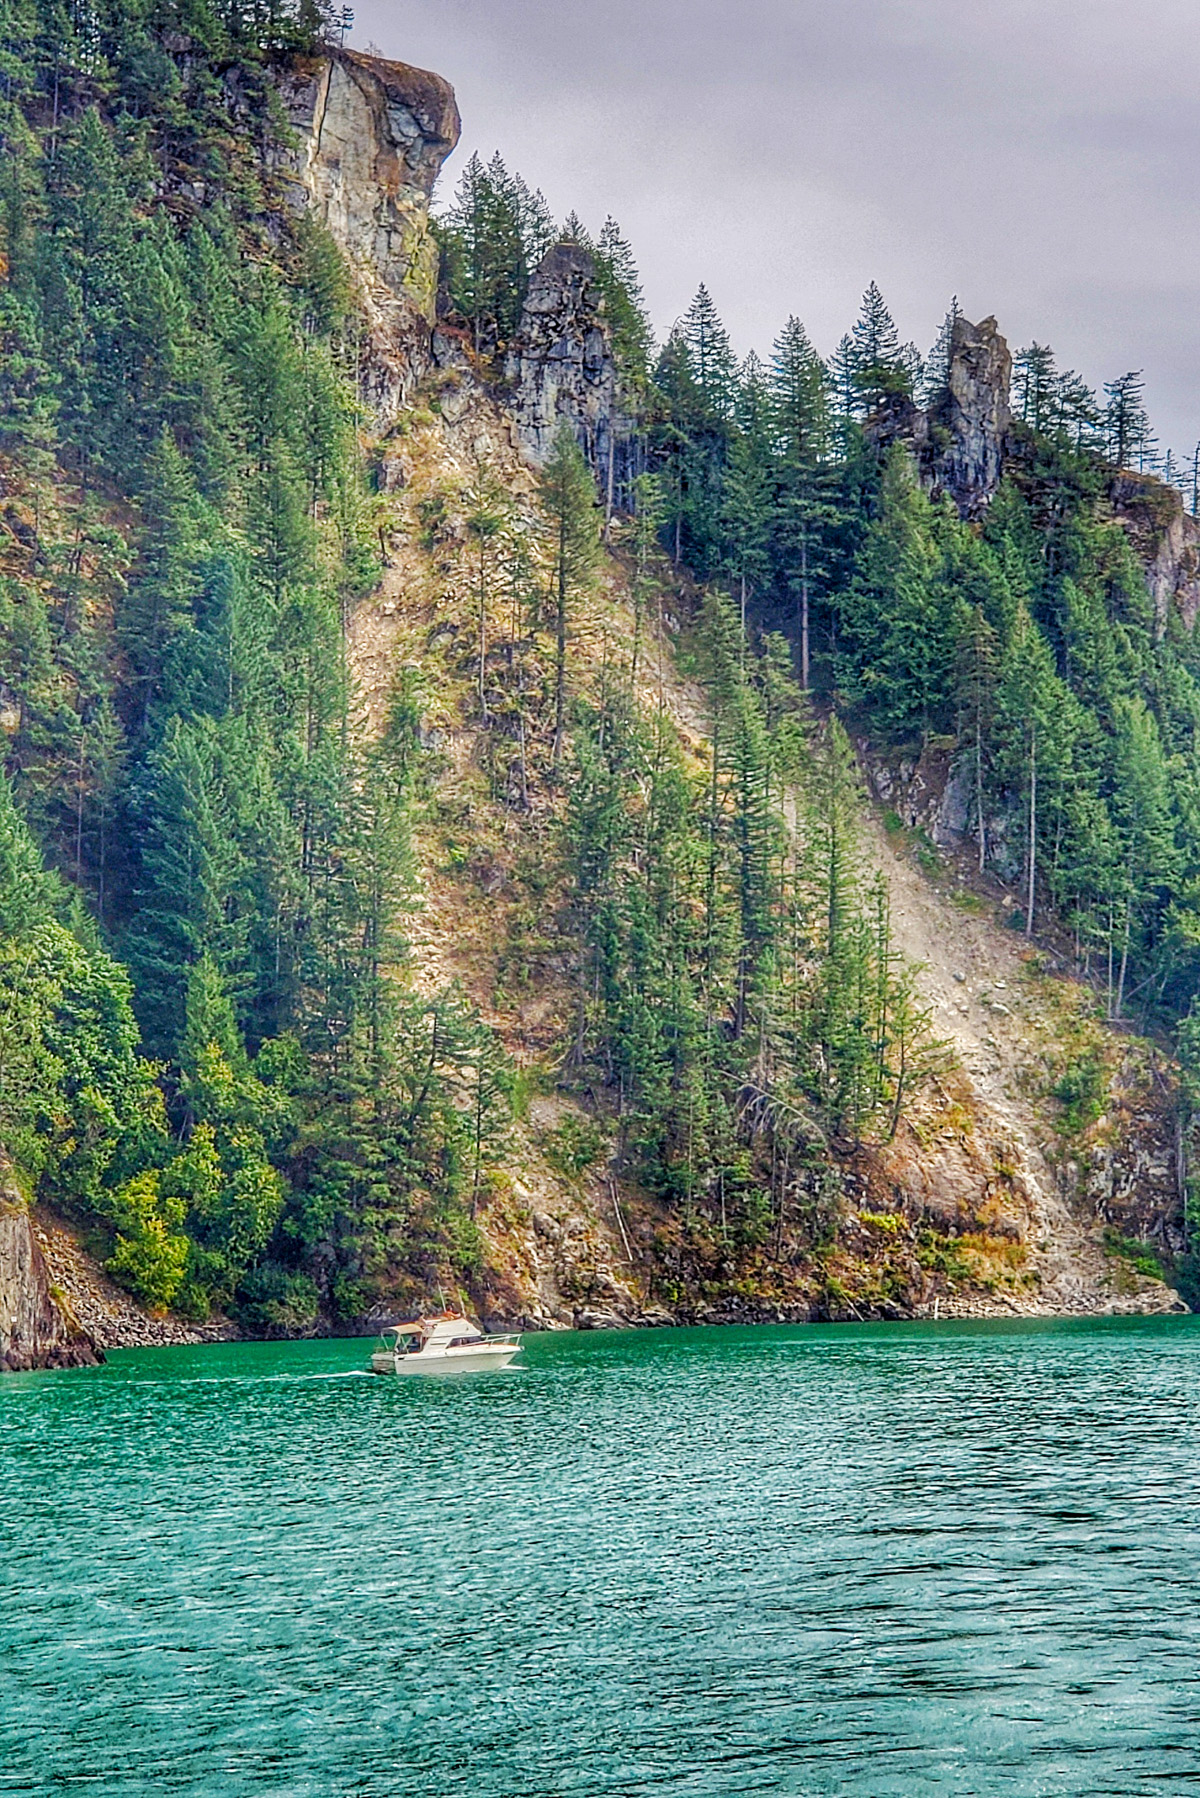 Harrison lake view with cliff and boat